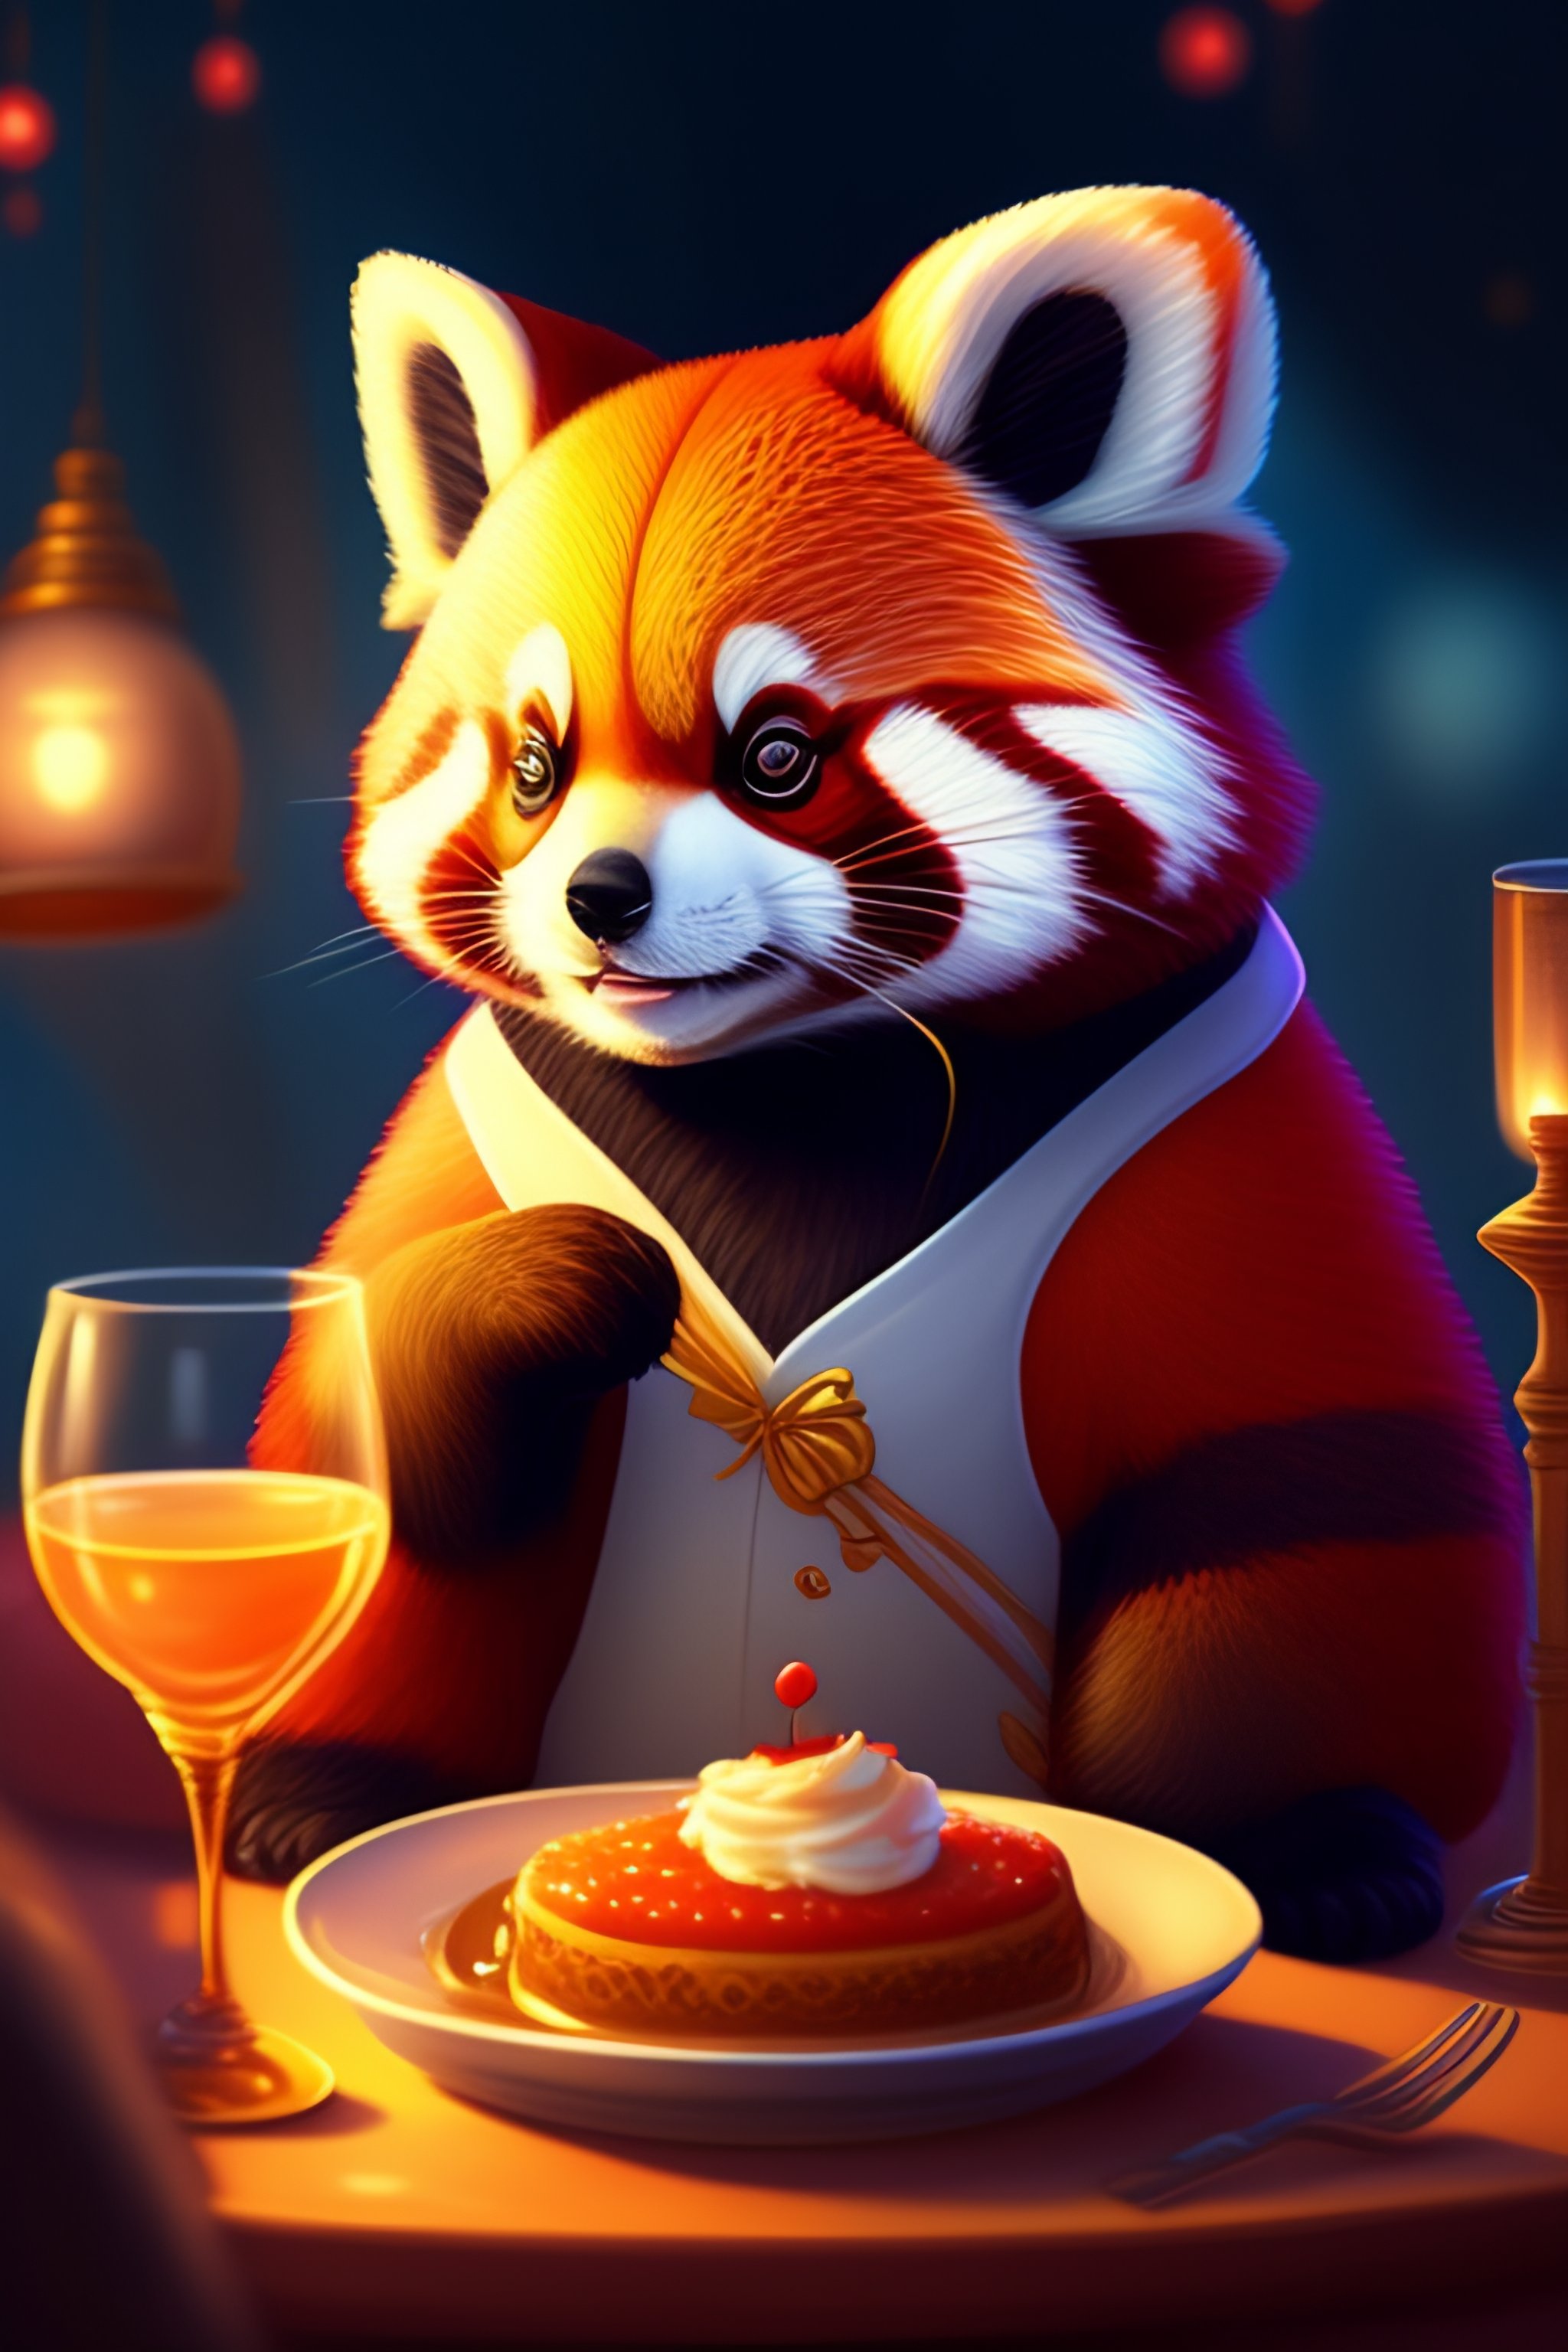 Lexica - Cute and adorable cartoon red panda, dining at long table on ...